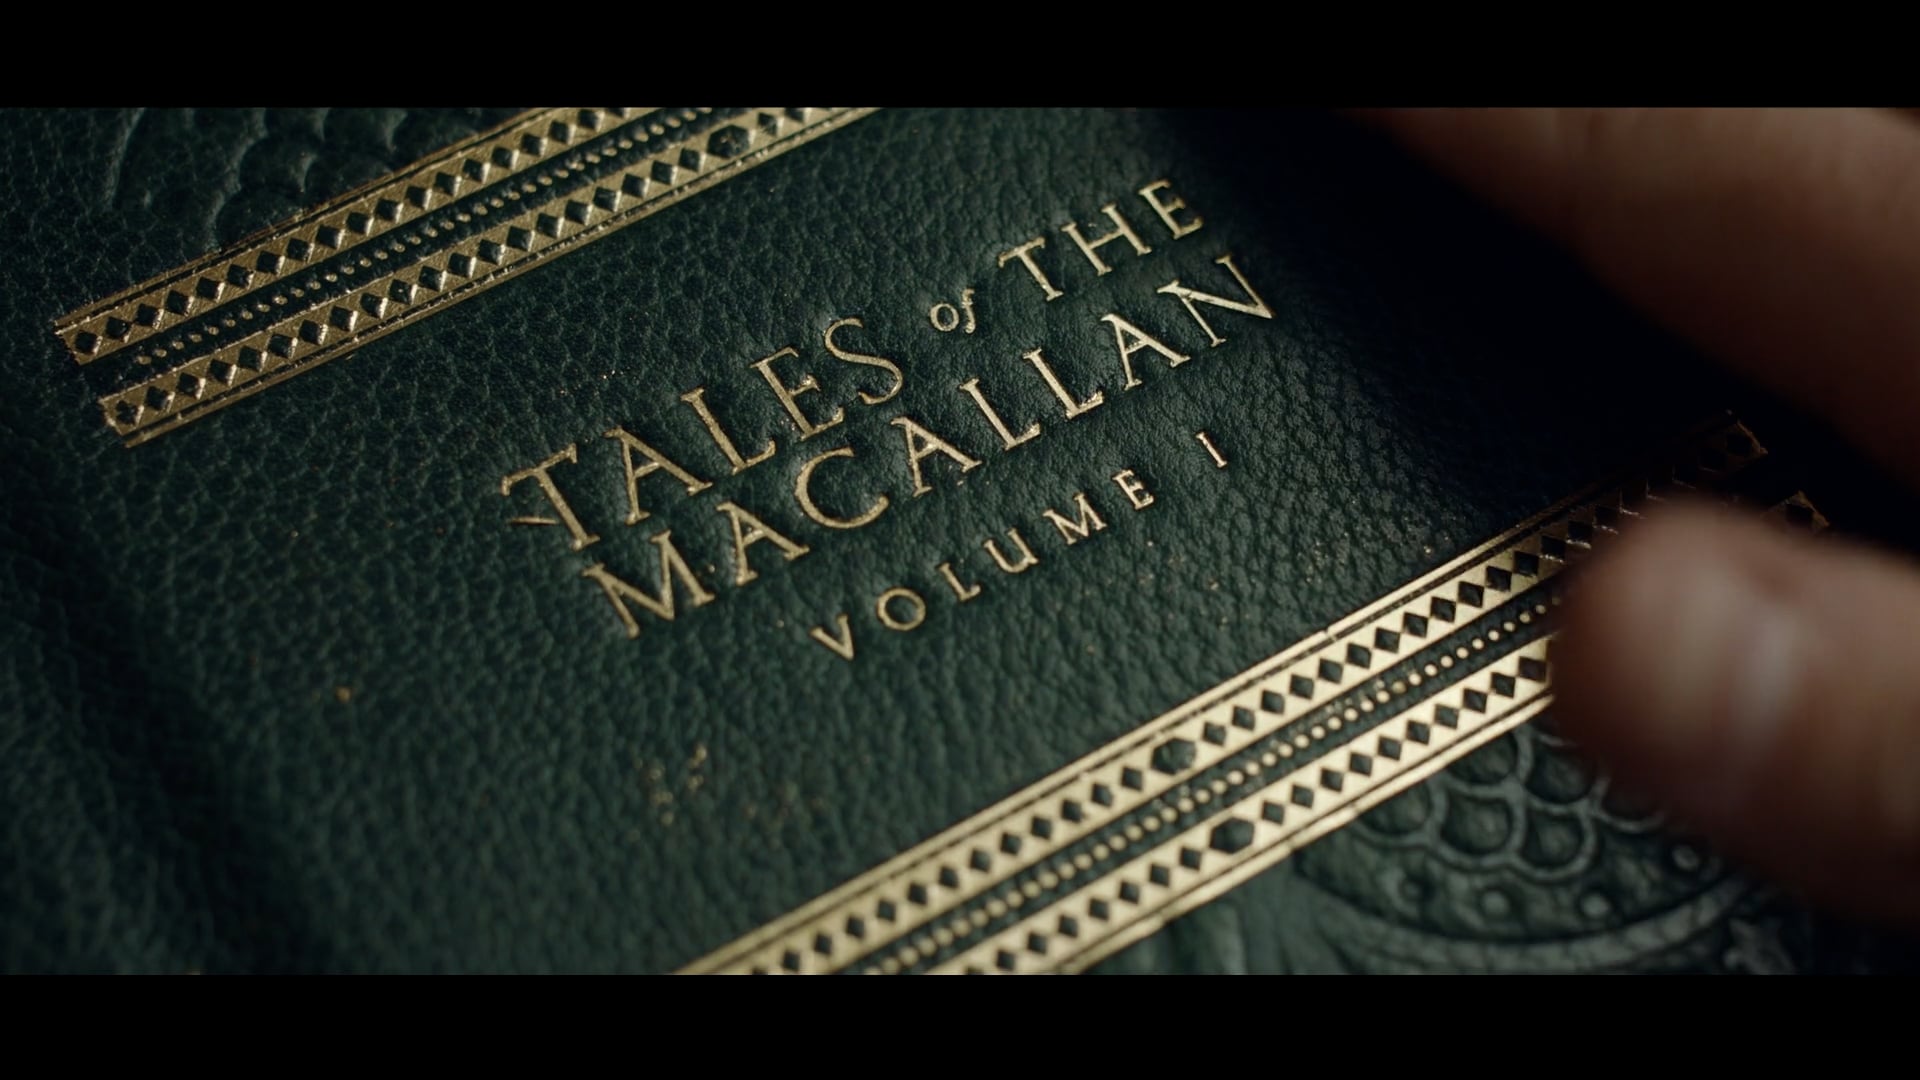 TALES OF THE MACALLAN